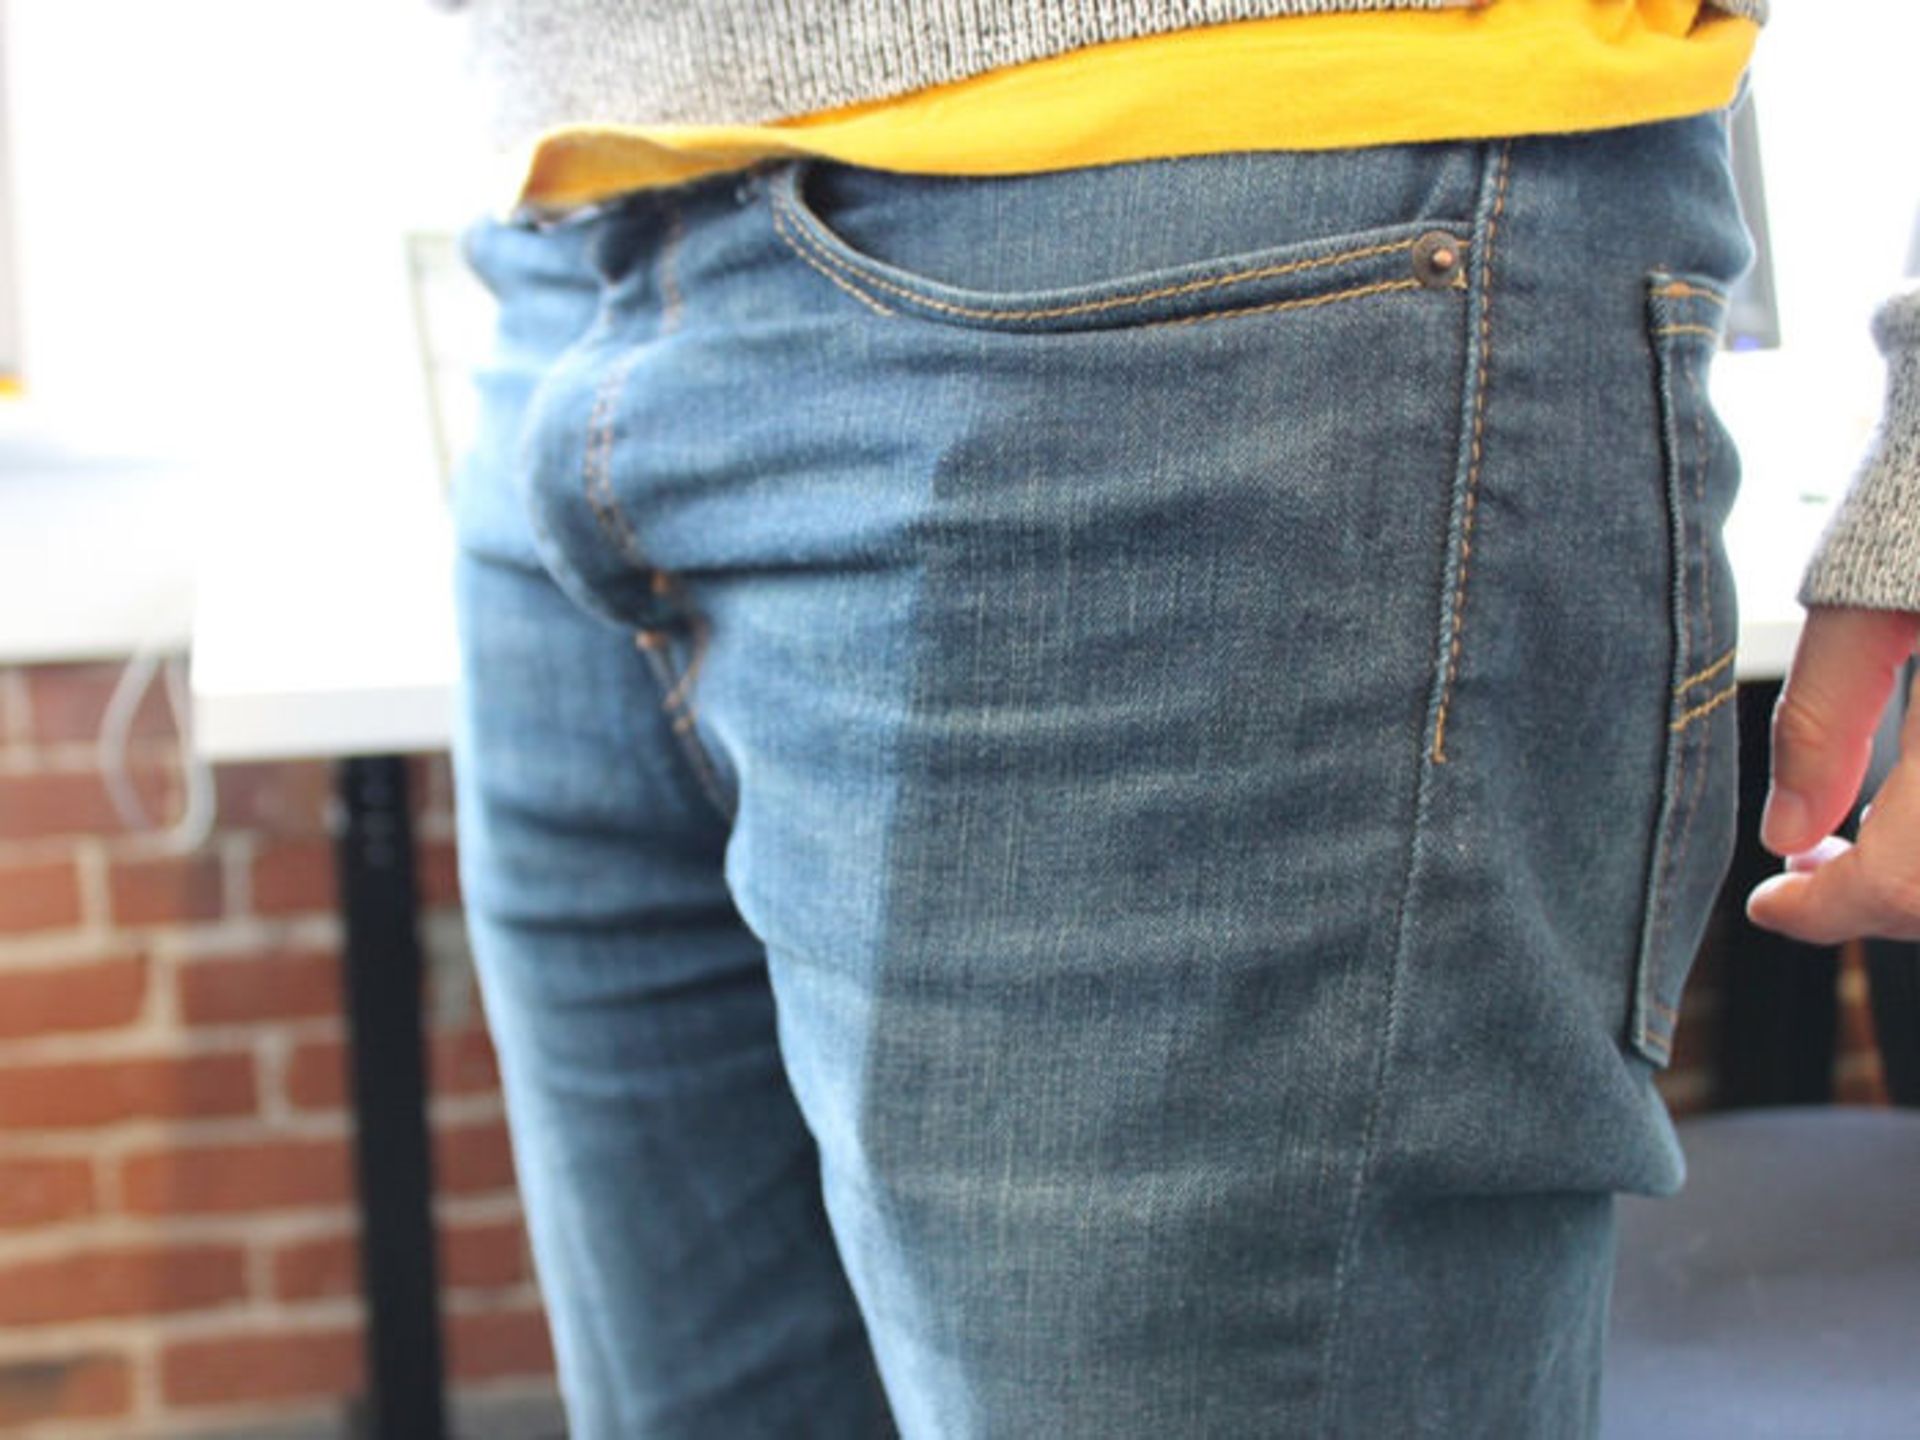 the-iphone-6-fits-perfectly-in-most-pockets